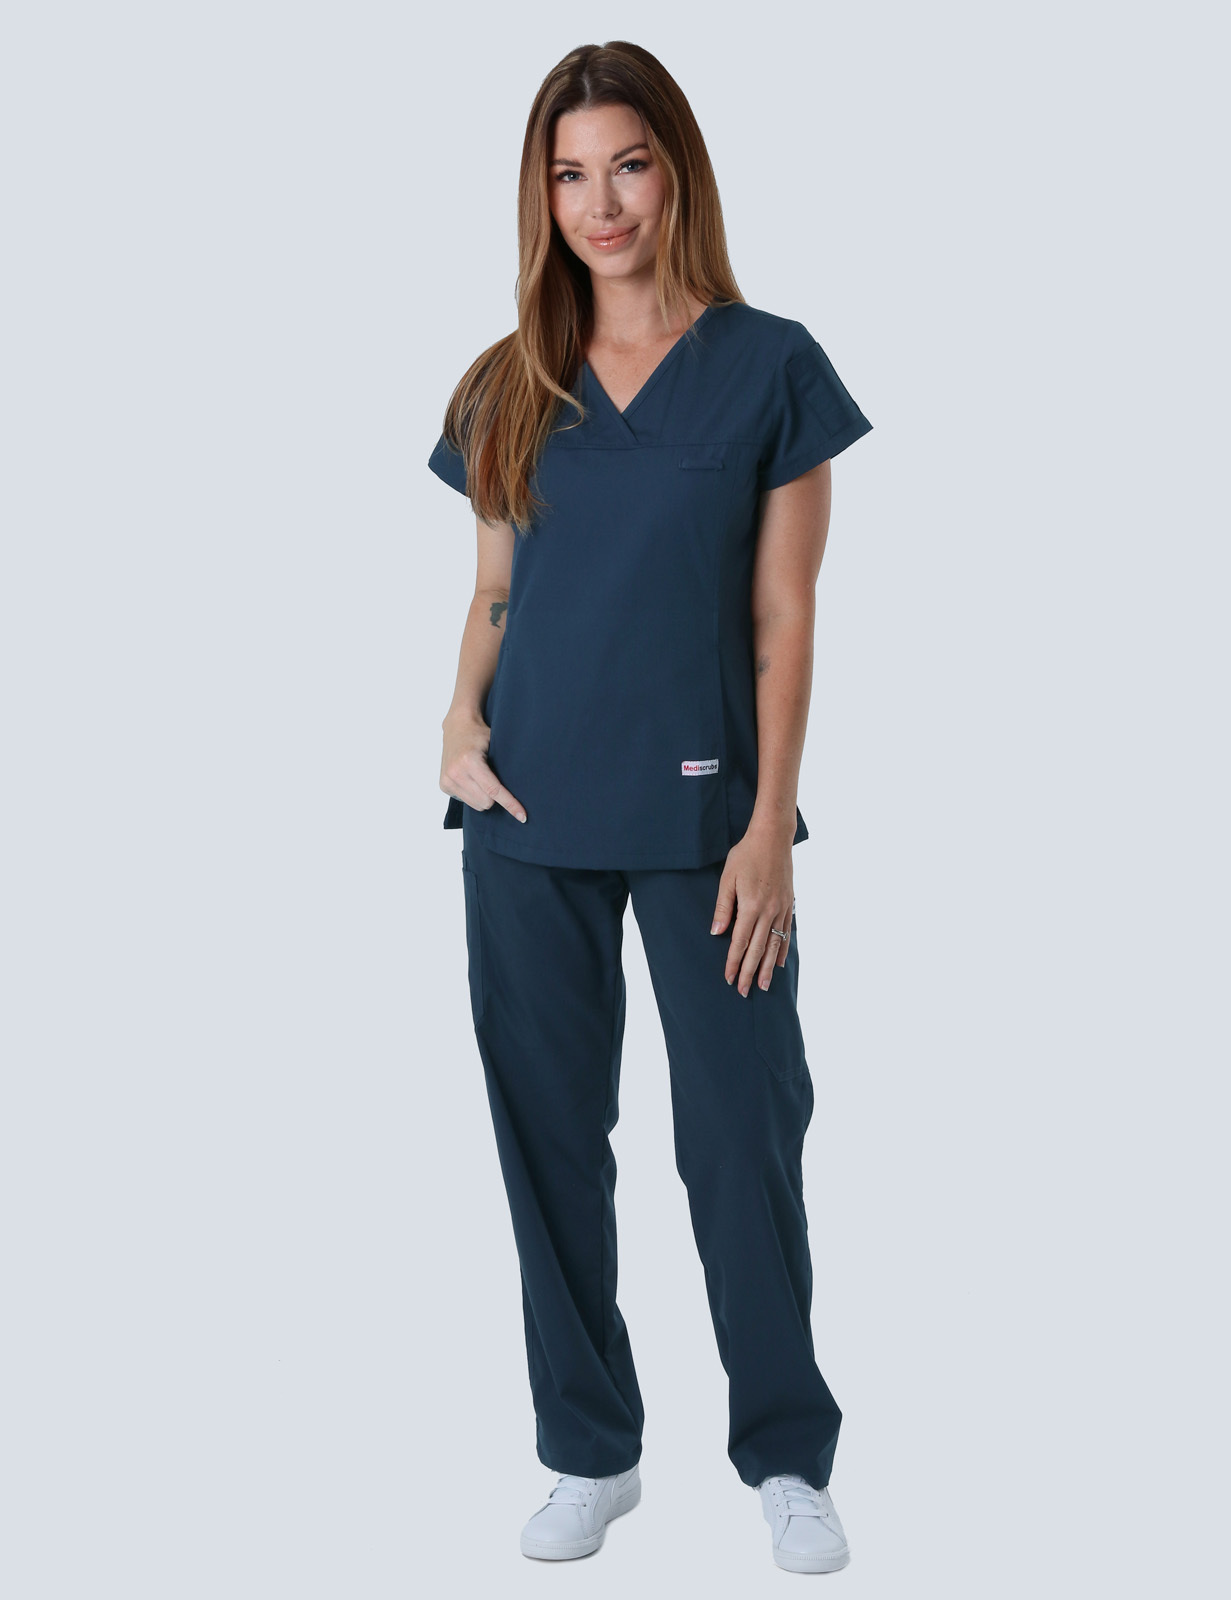 Women's Fit Solid Scrub Top - Navy - 2X Large